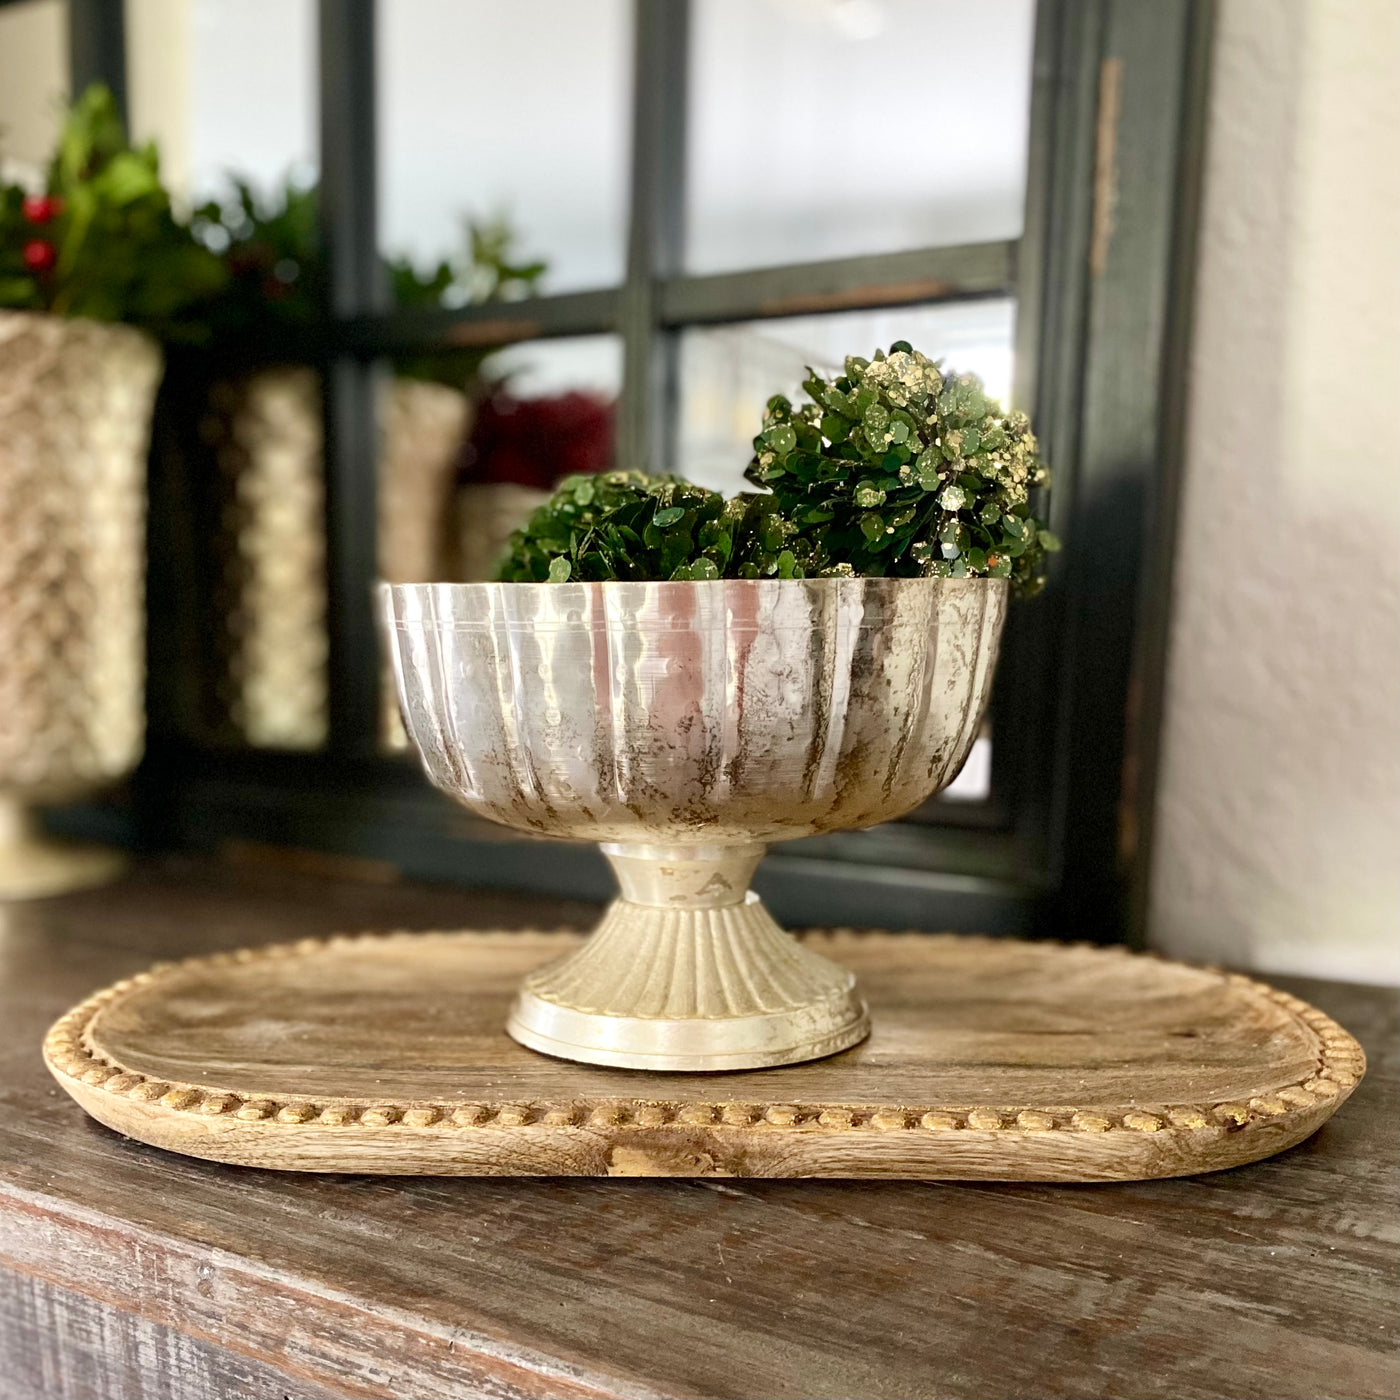 Hand-Carved Beaded Tray